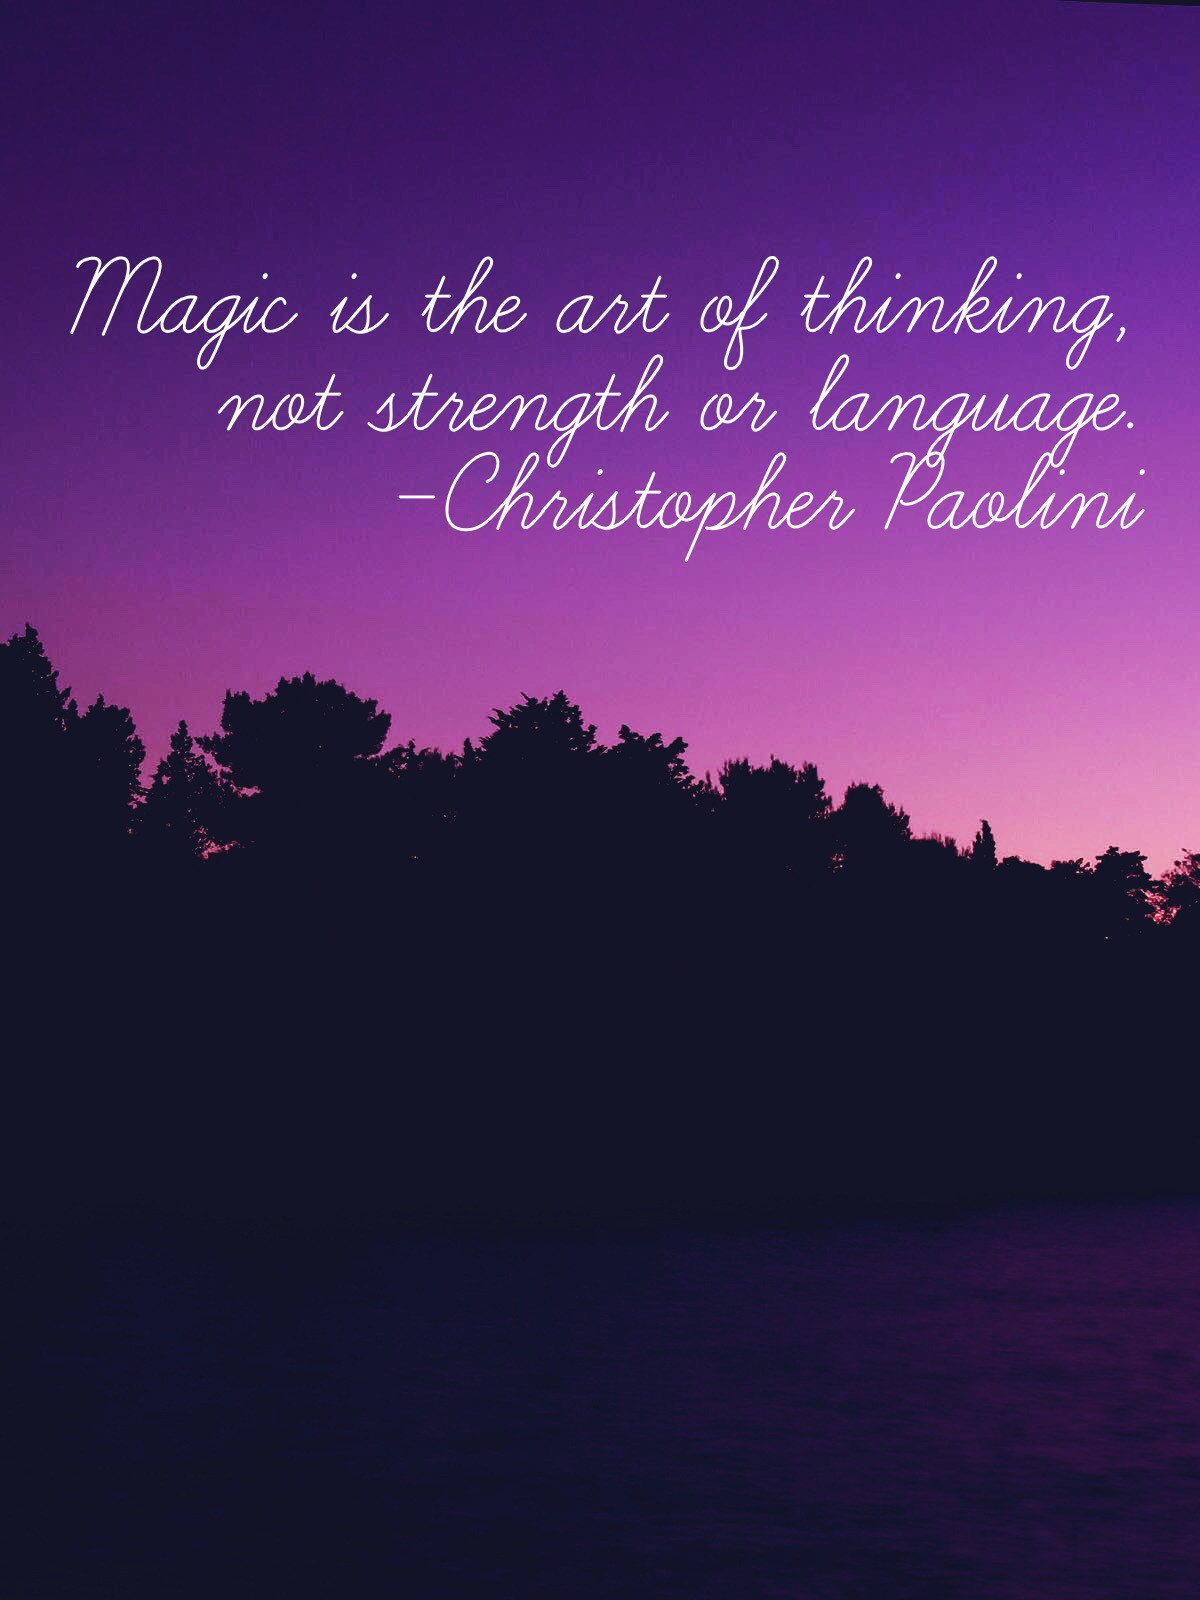 Beautiful Inspirational Quotes
 Breathtakingly Beautiful Inspirational Quotes about Magic